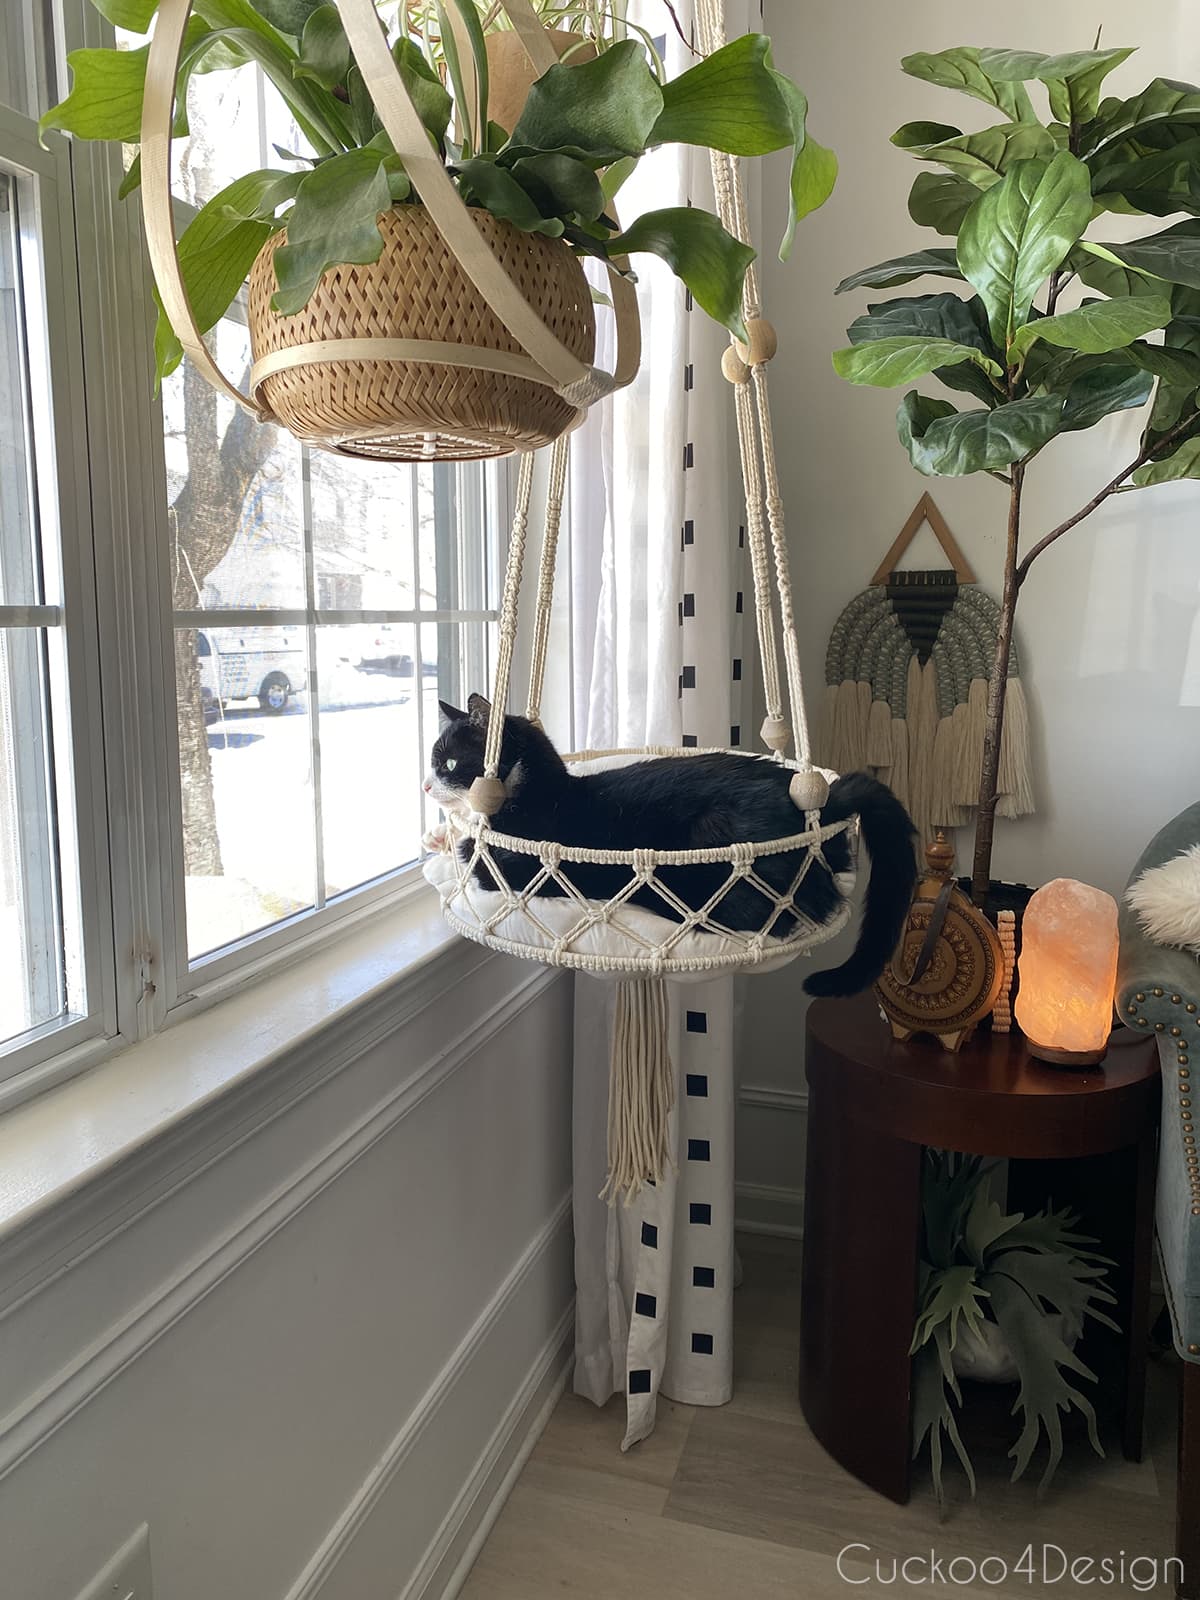 our tuxedo cat looking out the window from macrame cat bed